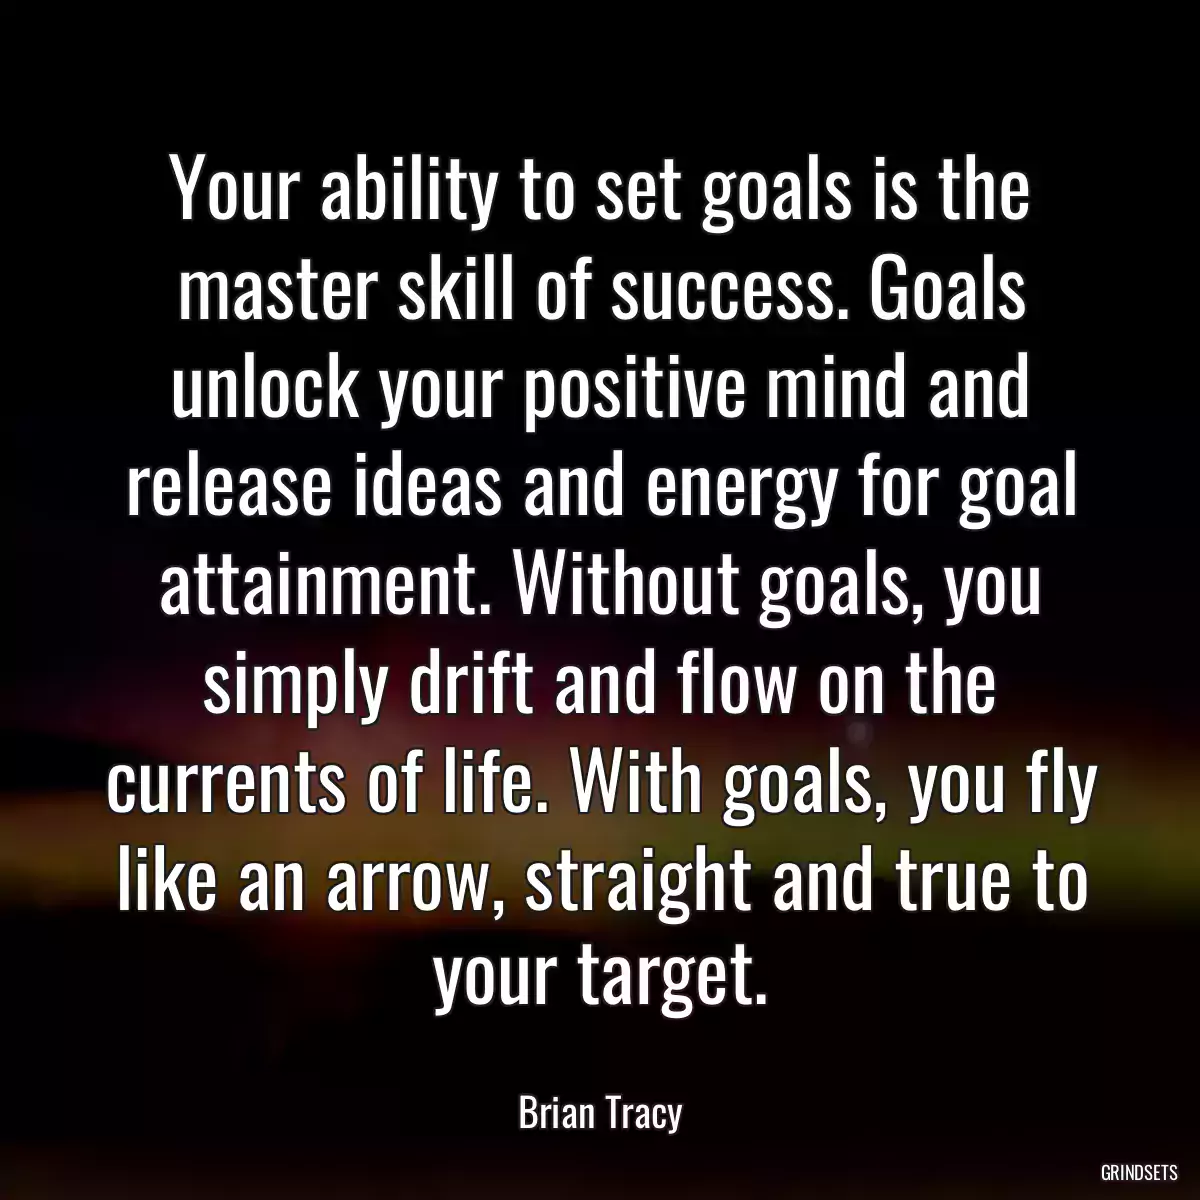 Your ability to set goals is the master skill of success. Goals unlock your positive mind and release ideas and energy for goal attainment. Without goals, you simply drift and flow on the currents of life. With goals, you fly like an arrow, straight and true to your target.